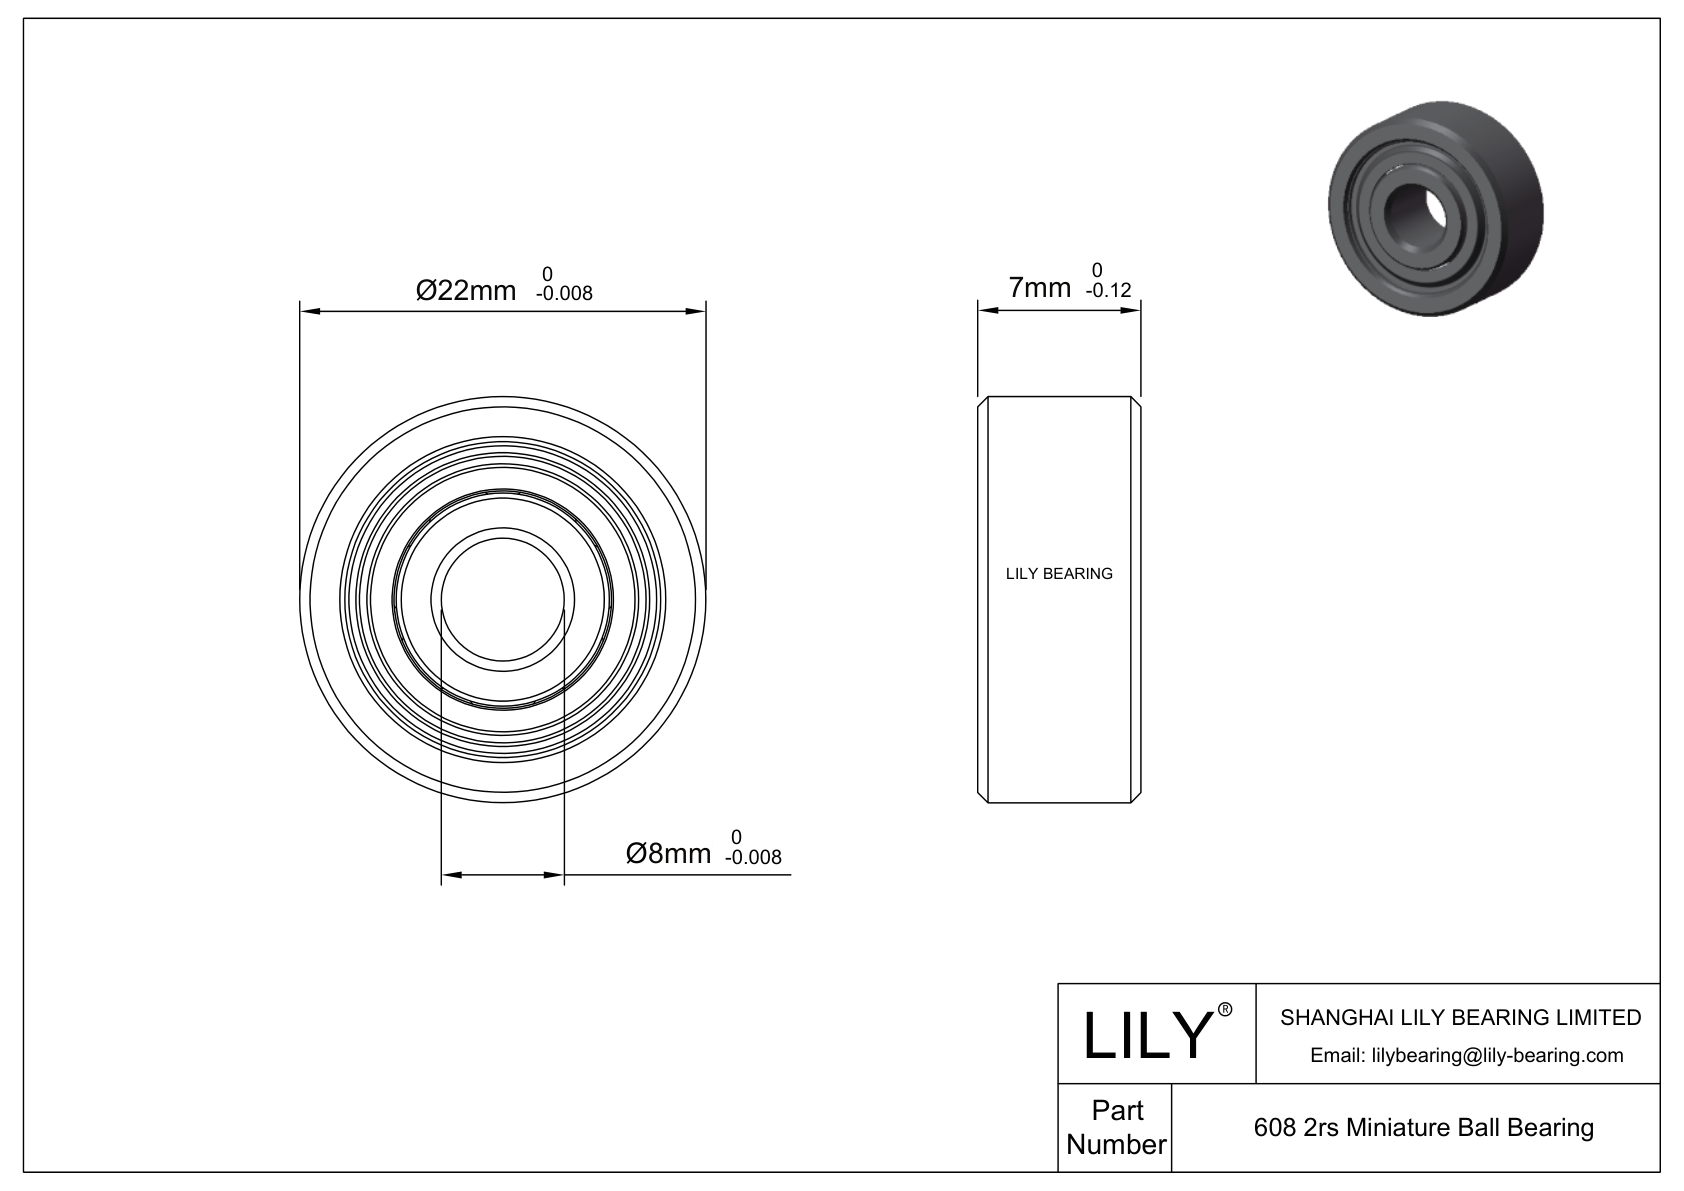 LILY-BS60832-12 POM Coated Bearing cad drawing